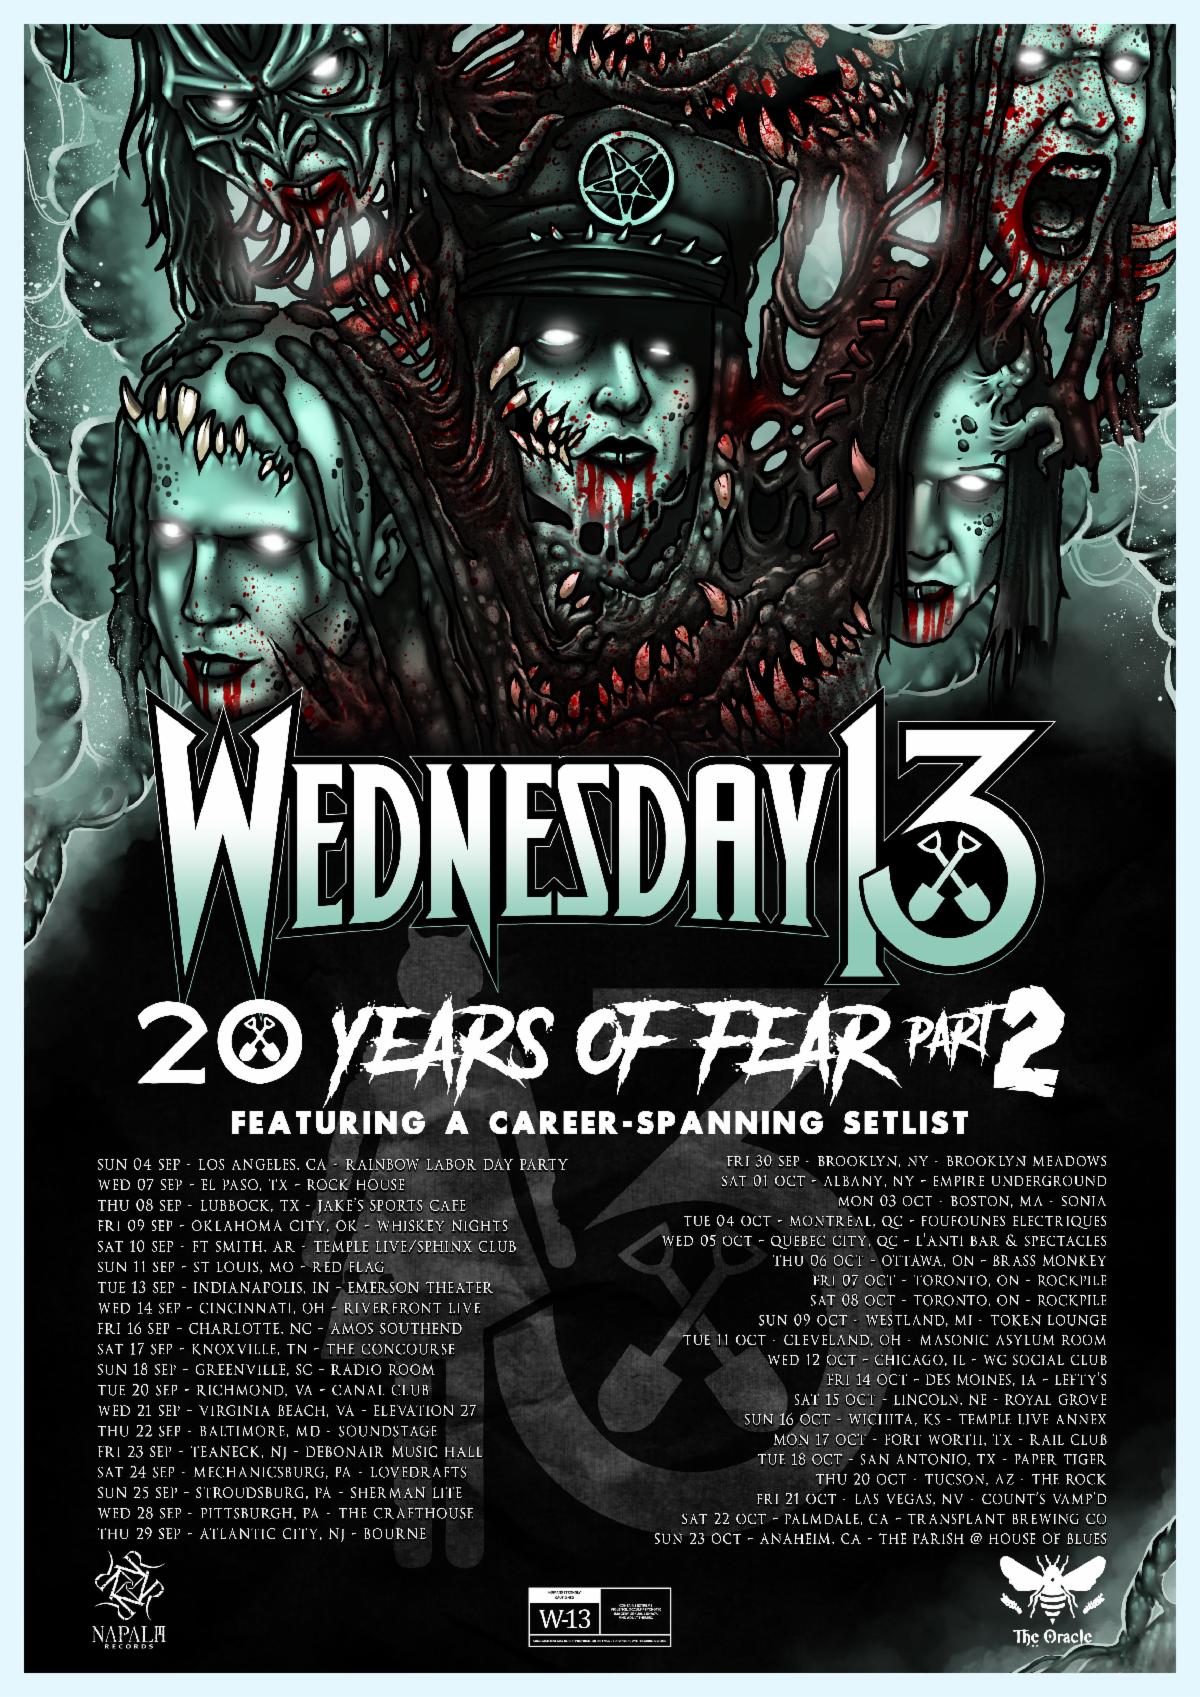 WEDNESDAY 13 To Begin Second Leg of "20 Years of Fear" North American Headline Tour Next Month!